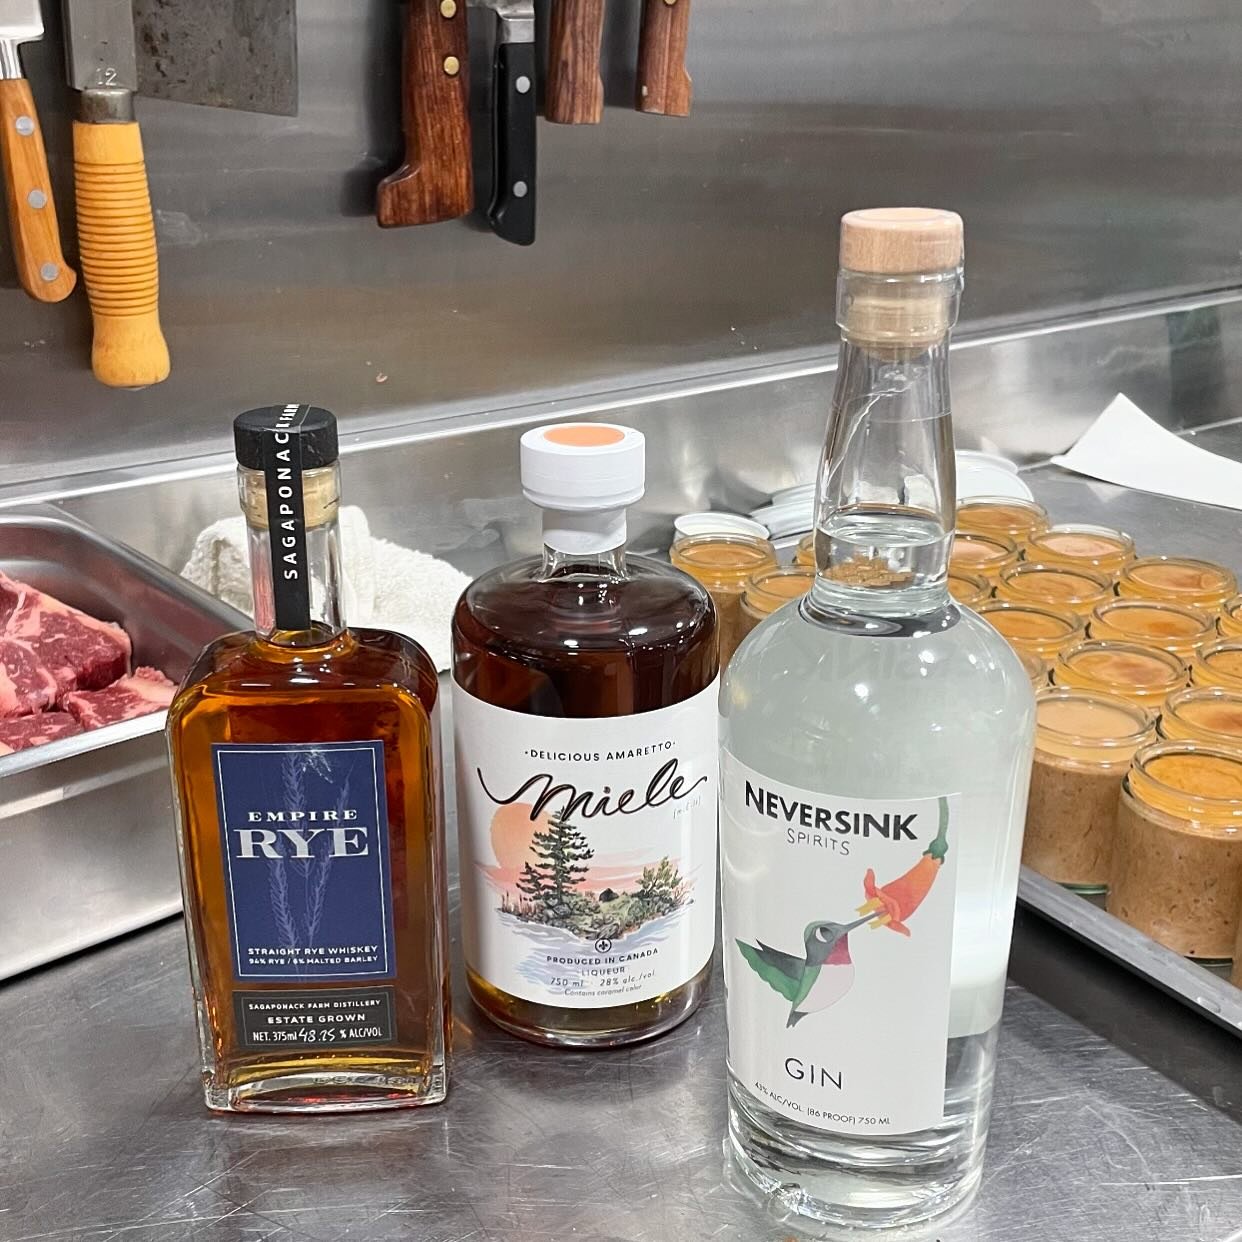 Only the finest ingredients - from meats to flours to vegetables to booze! We use only handcrafted spirits, mostly from NY state, in our charcuterie recipes, because it&rsquo;s the little things&hellip;